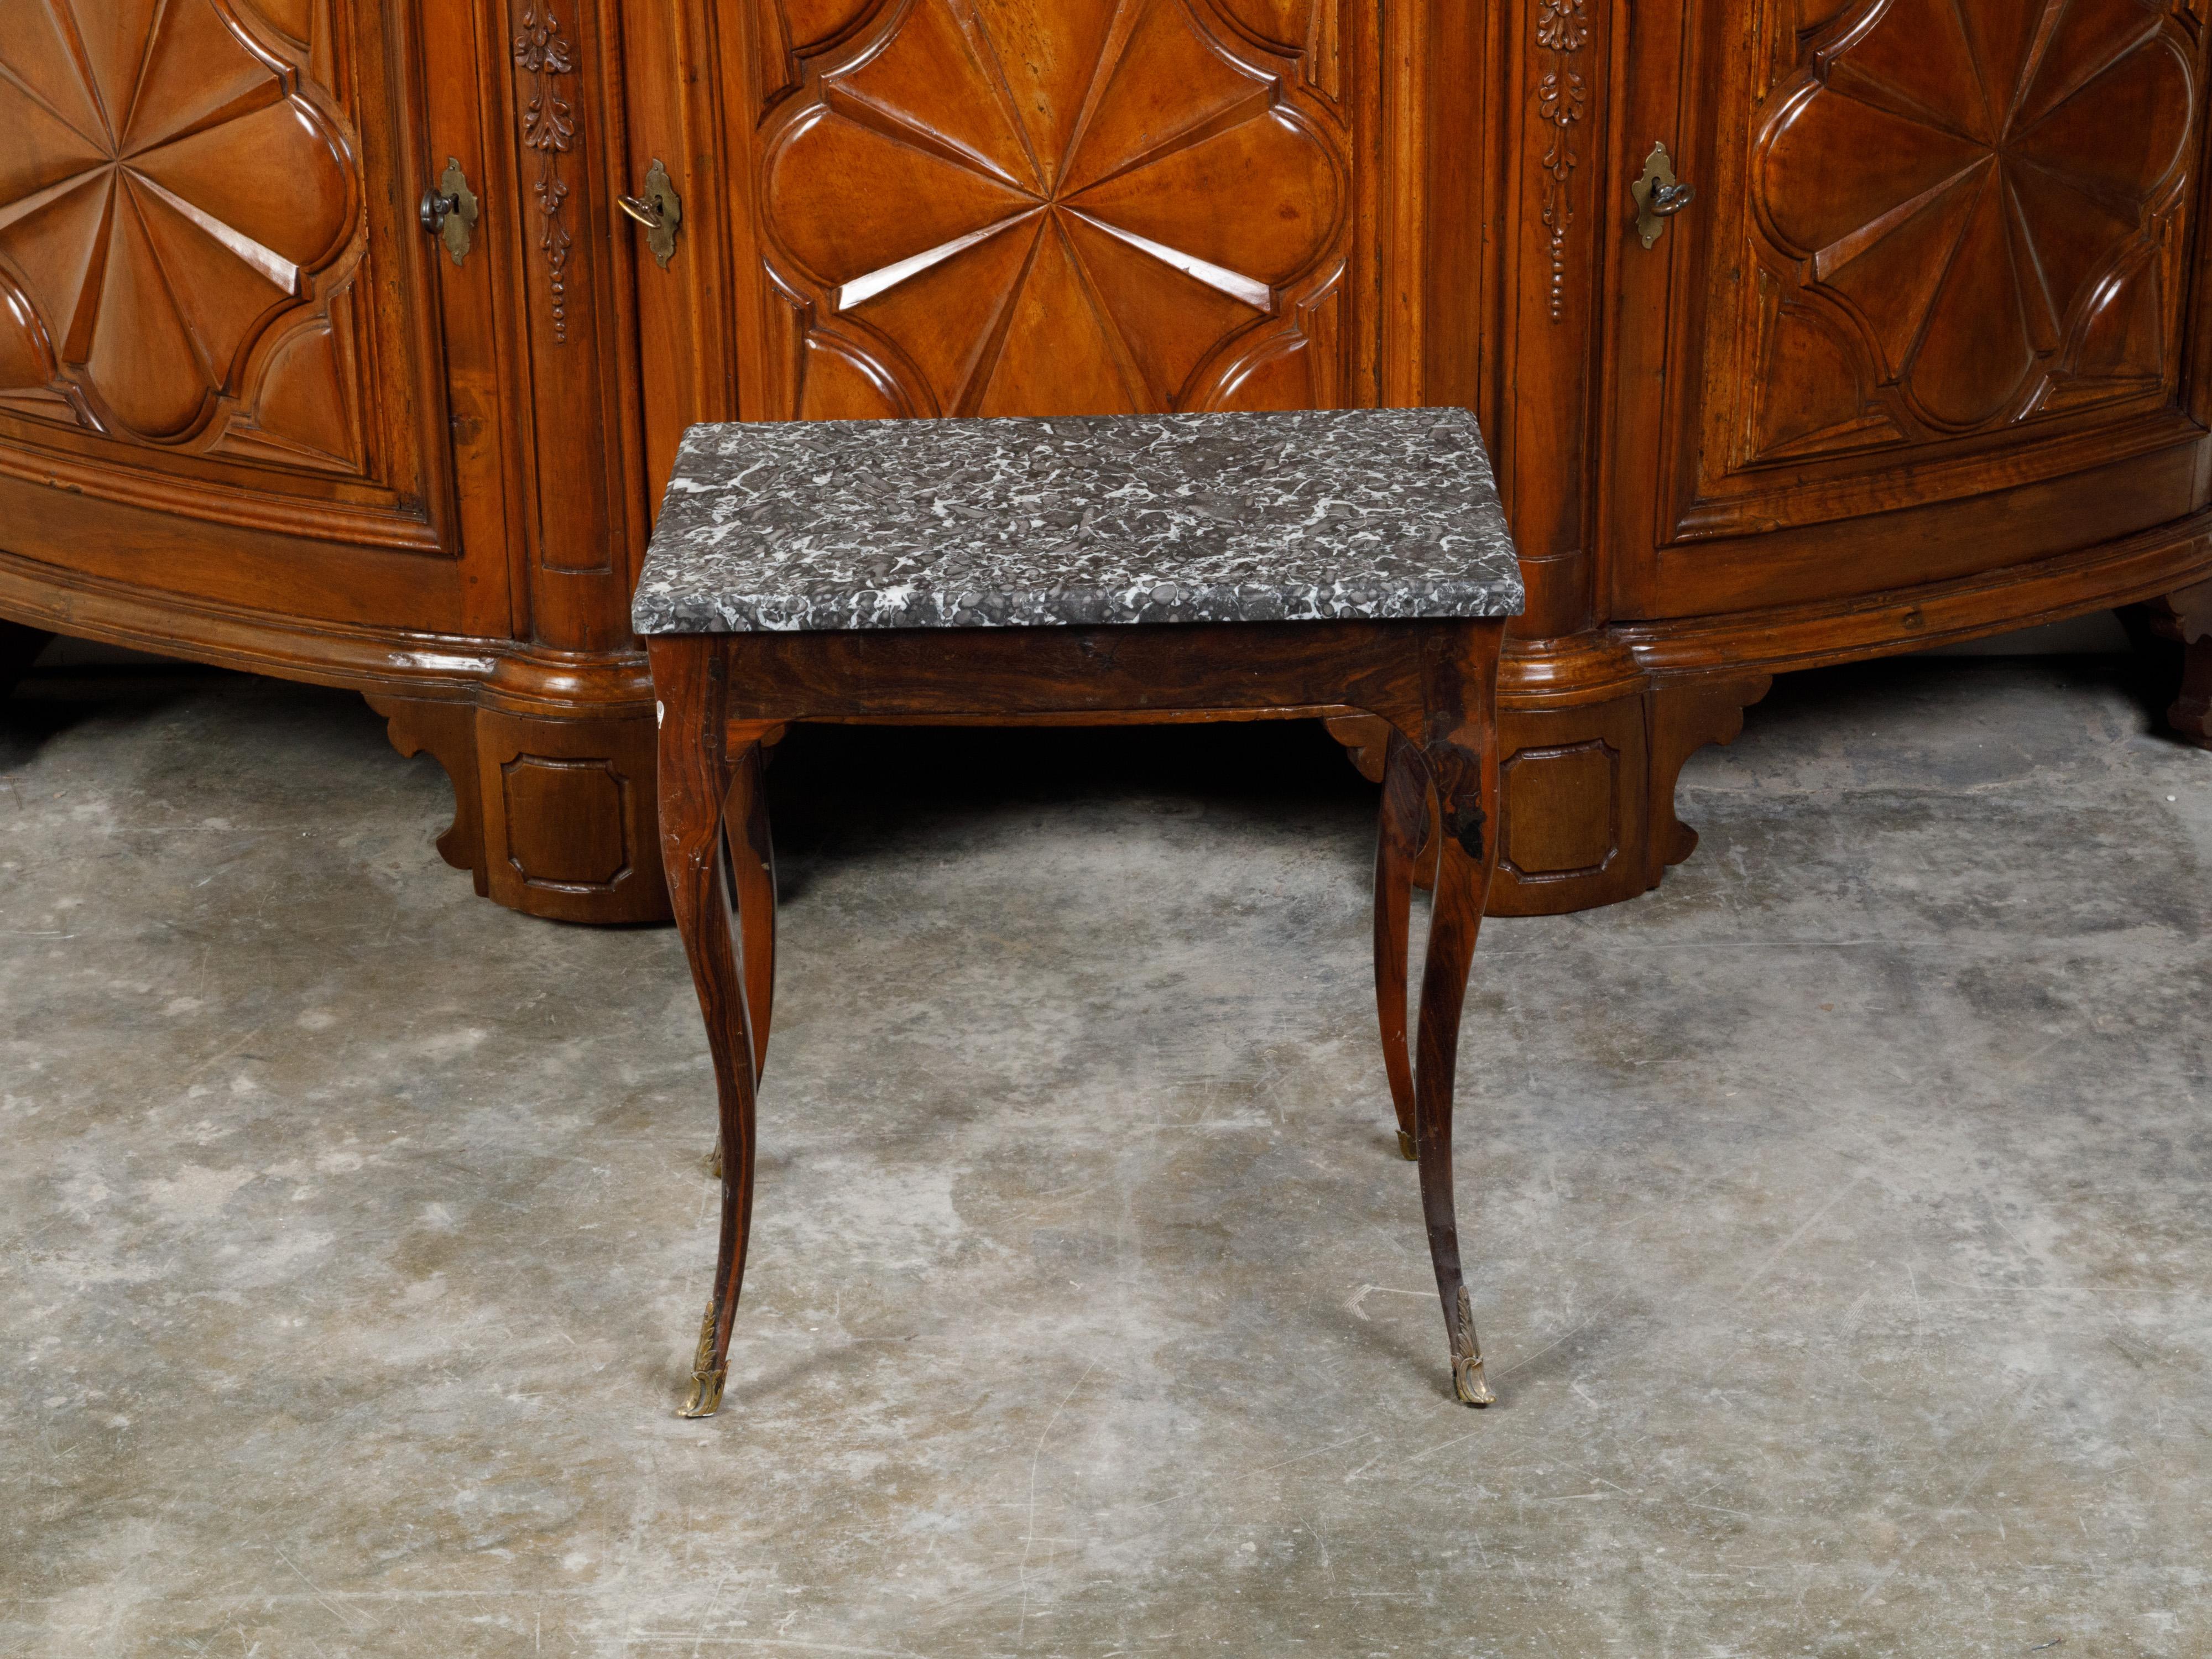 A French Louis XV style walnut side table from the 19th century, with grey marble top and bronze feet. Created in France during the 19th century, this walnut side table features a rectangular grey veined marble top sitting above four slender